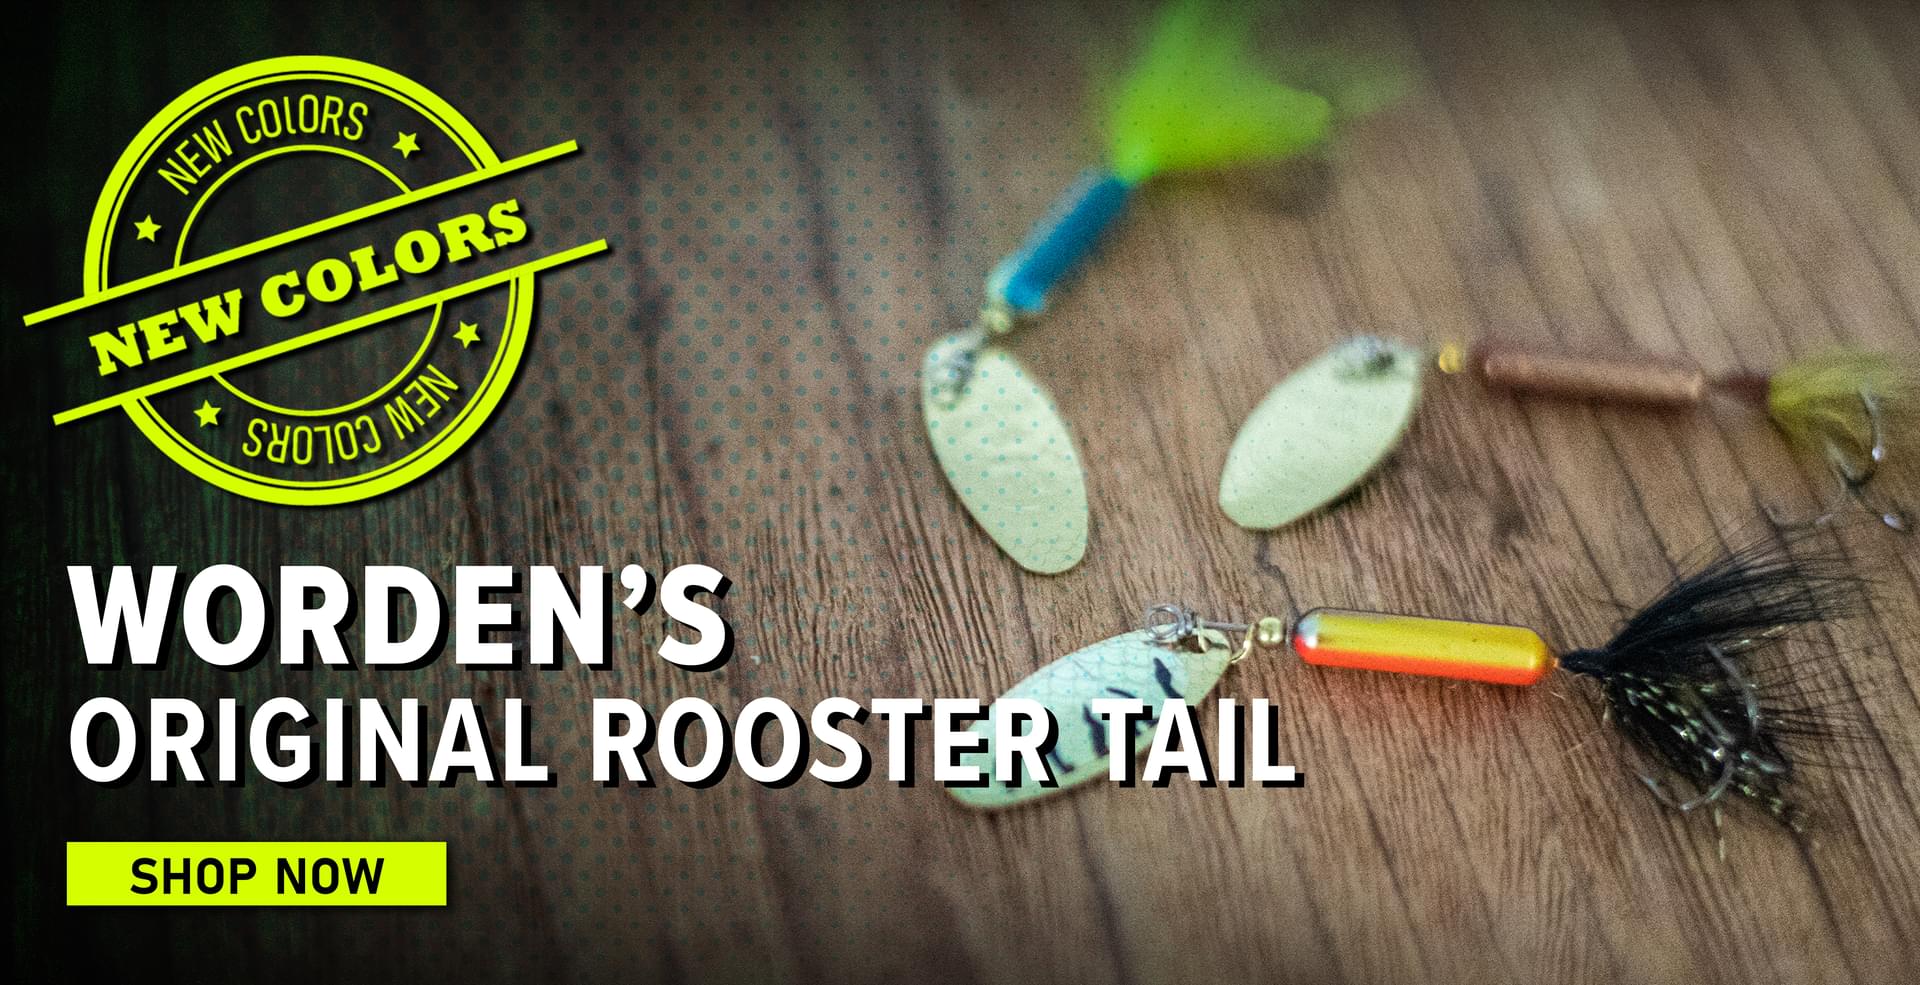 New Colors! Worden's Orignial Rooster Tail Shop Now